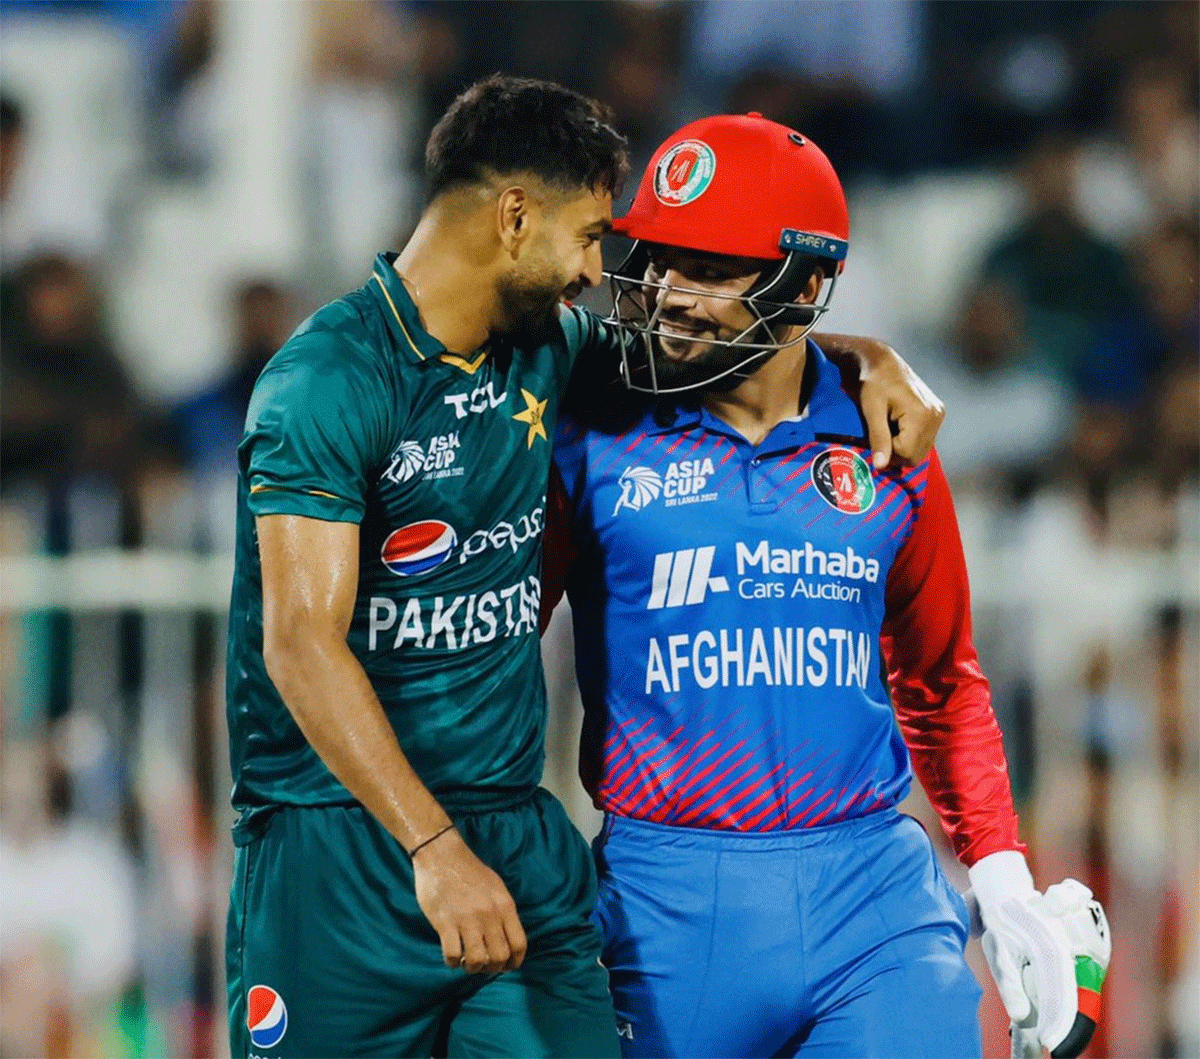 Pakistan's Haris Rauf and Afghanistan's Rashid Khan share a smile during their Asia Cup match in Sharjah on Wednesday